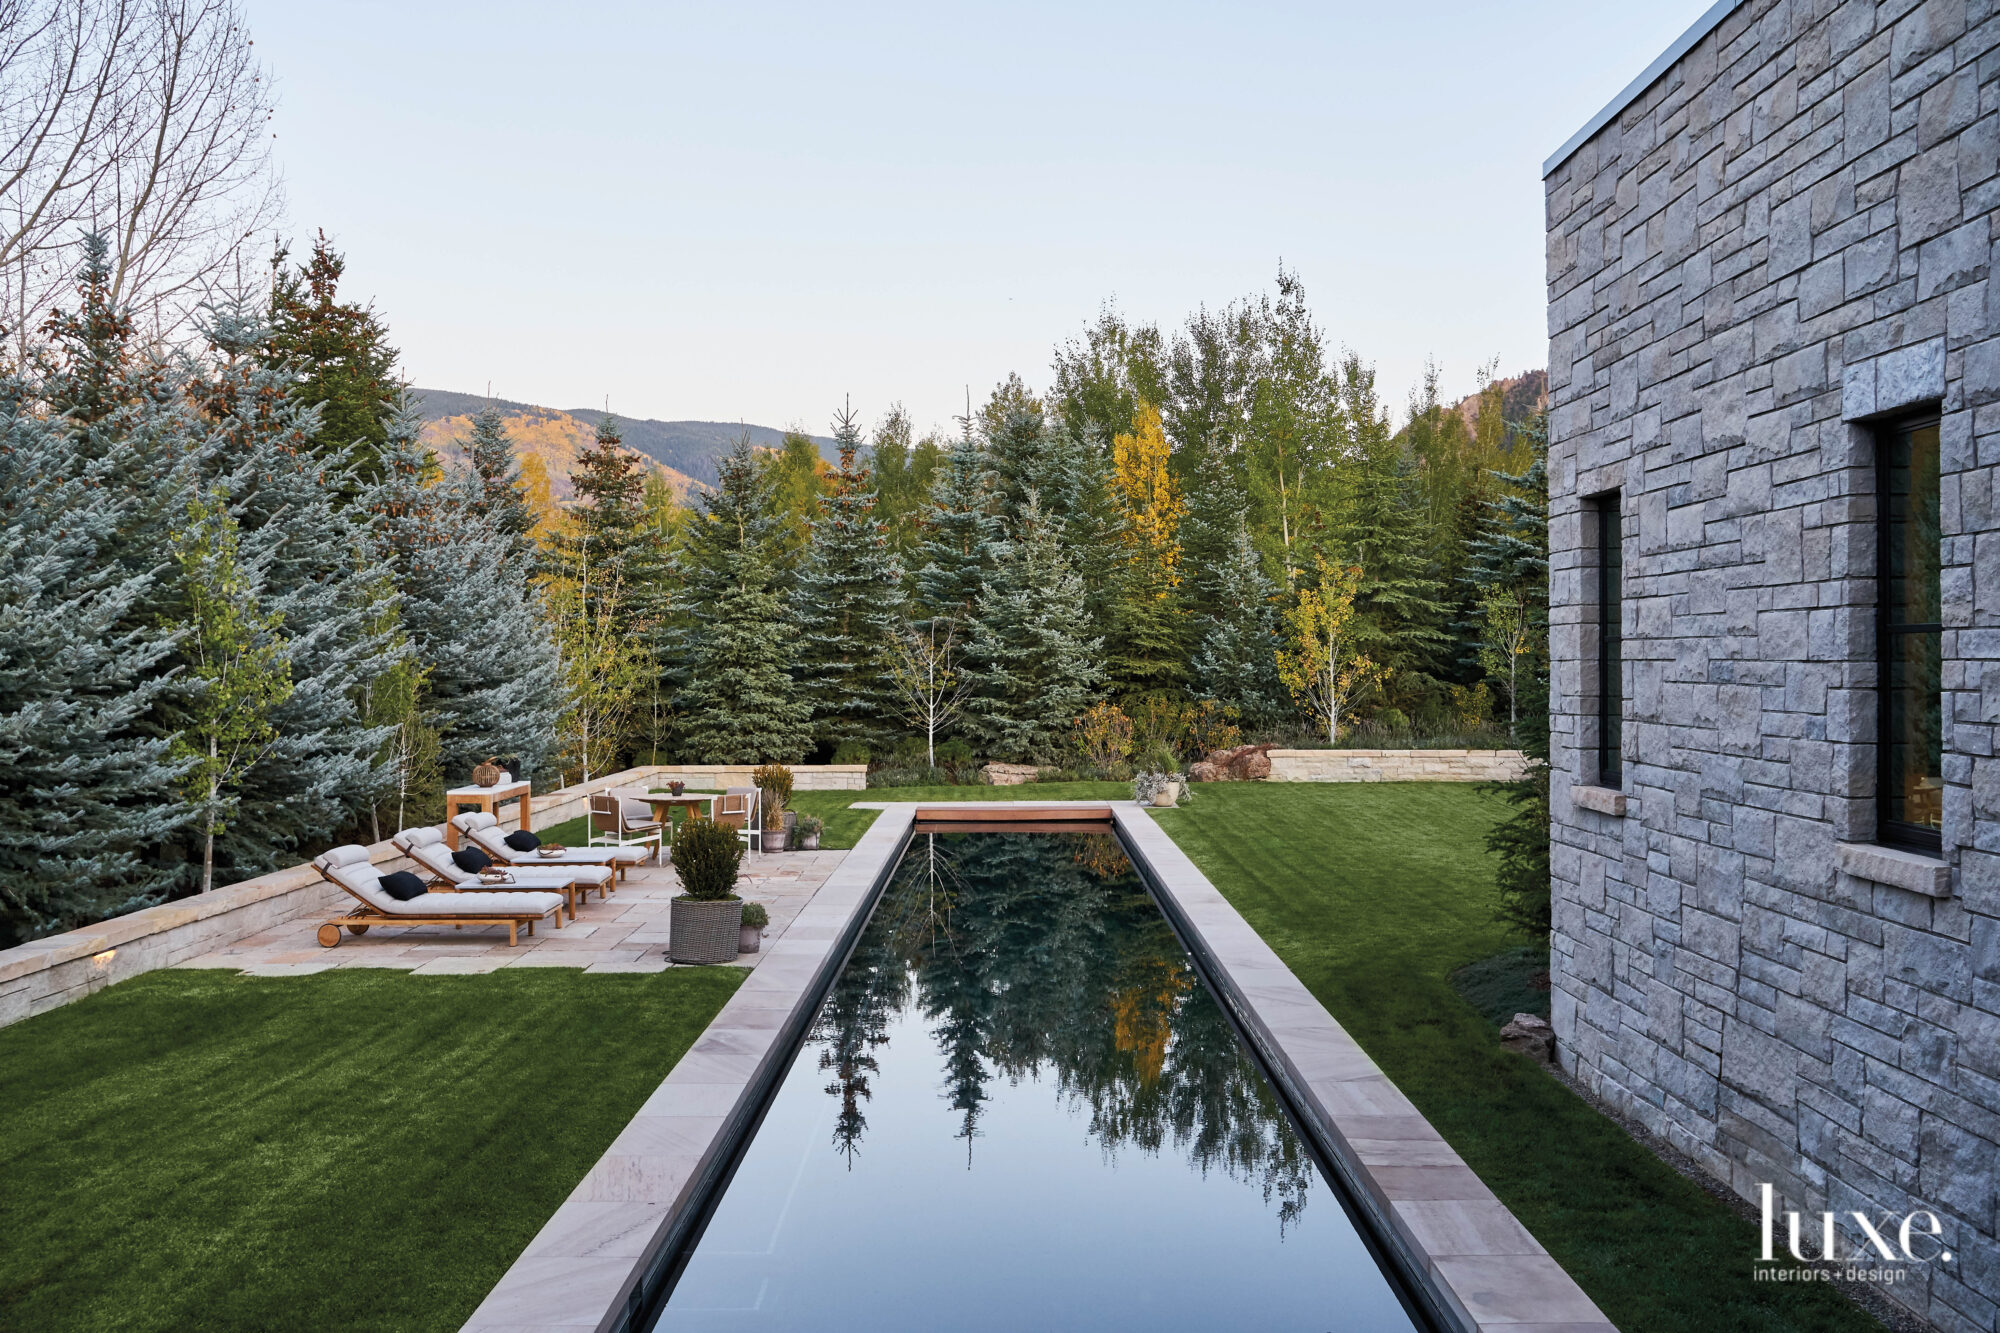 wellness room with long swimming pool stretching into the landscape